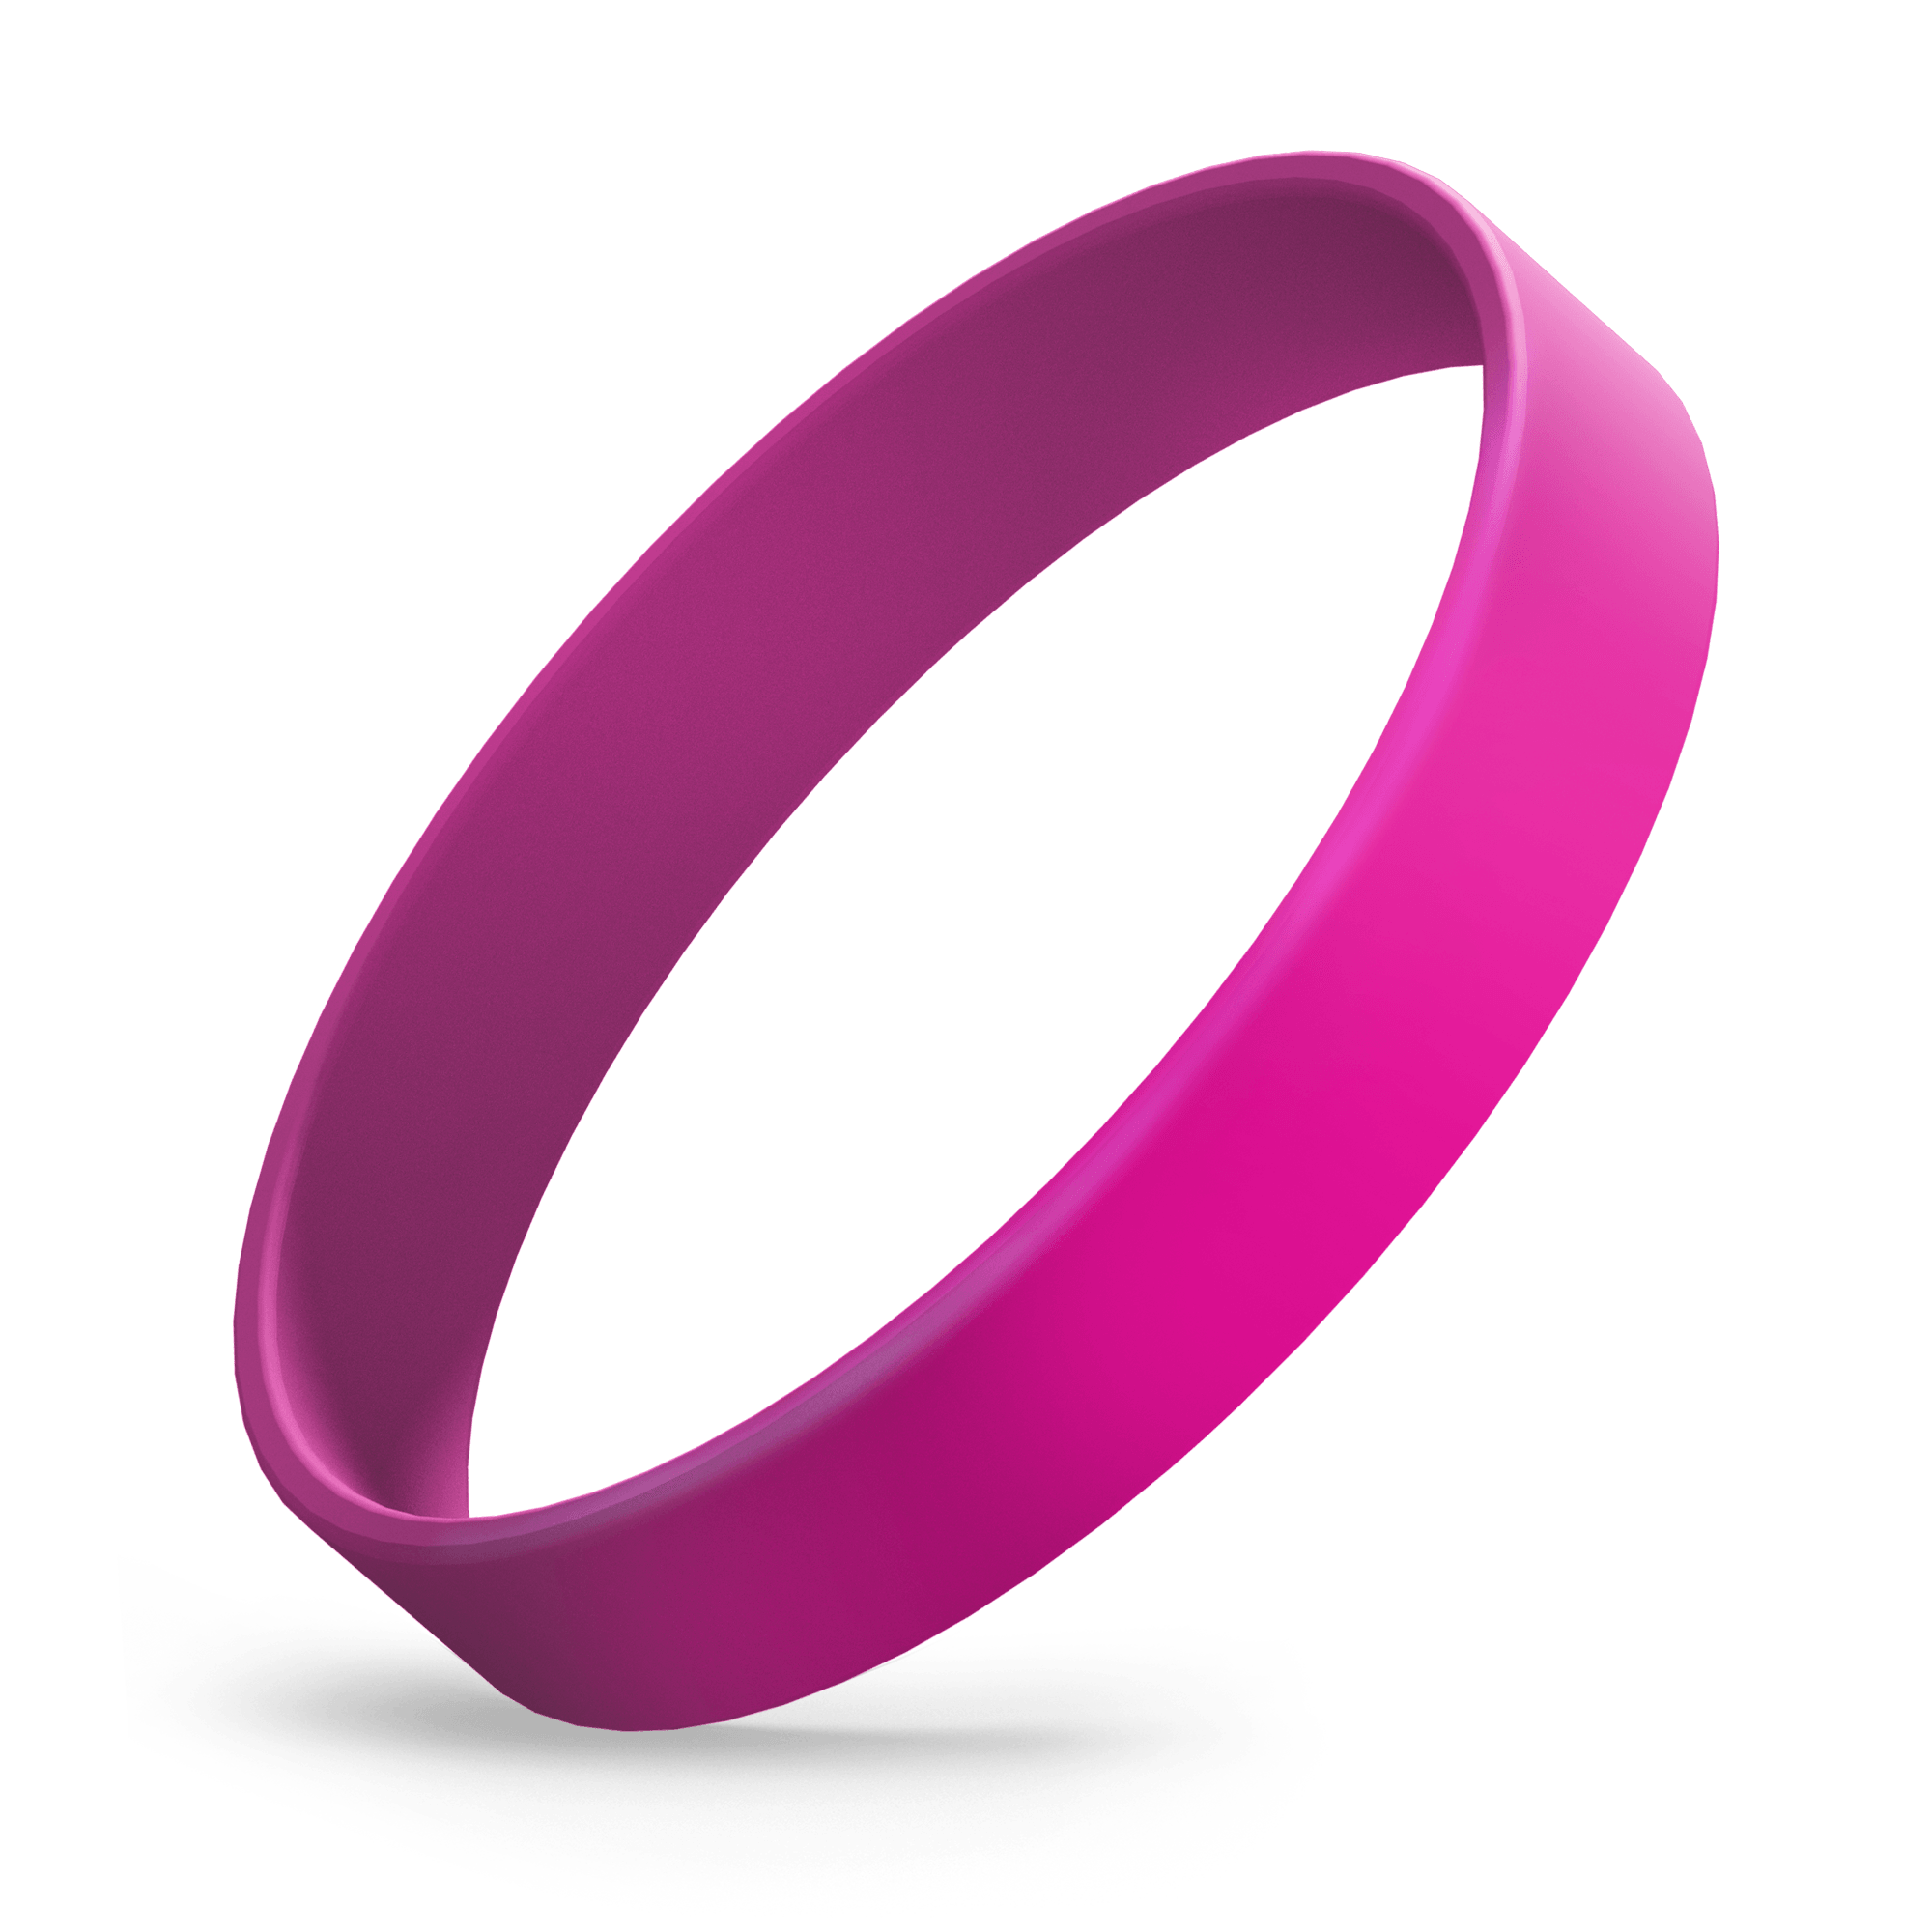 Custom Ink Injected (Hot Pink) Silicone Wristbands - Rubber Bracelets by Wristband Resources